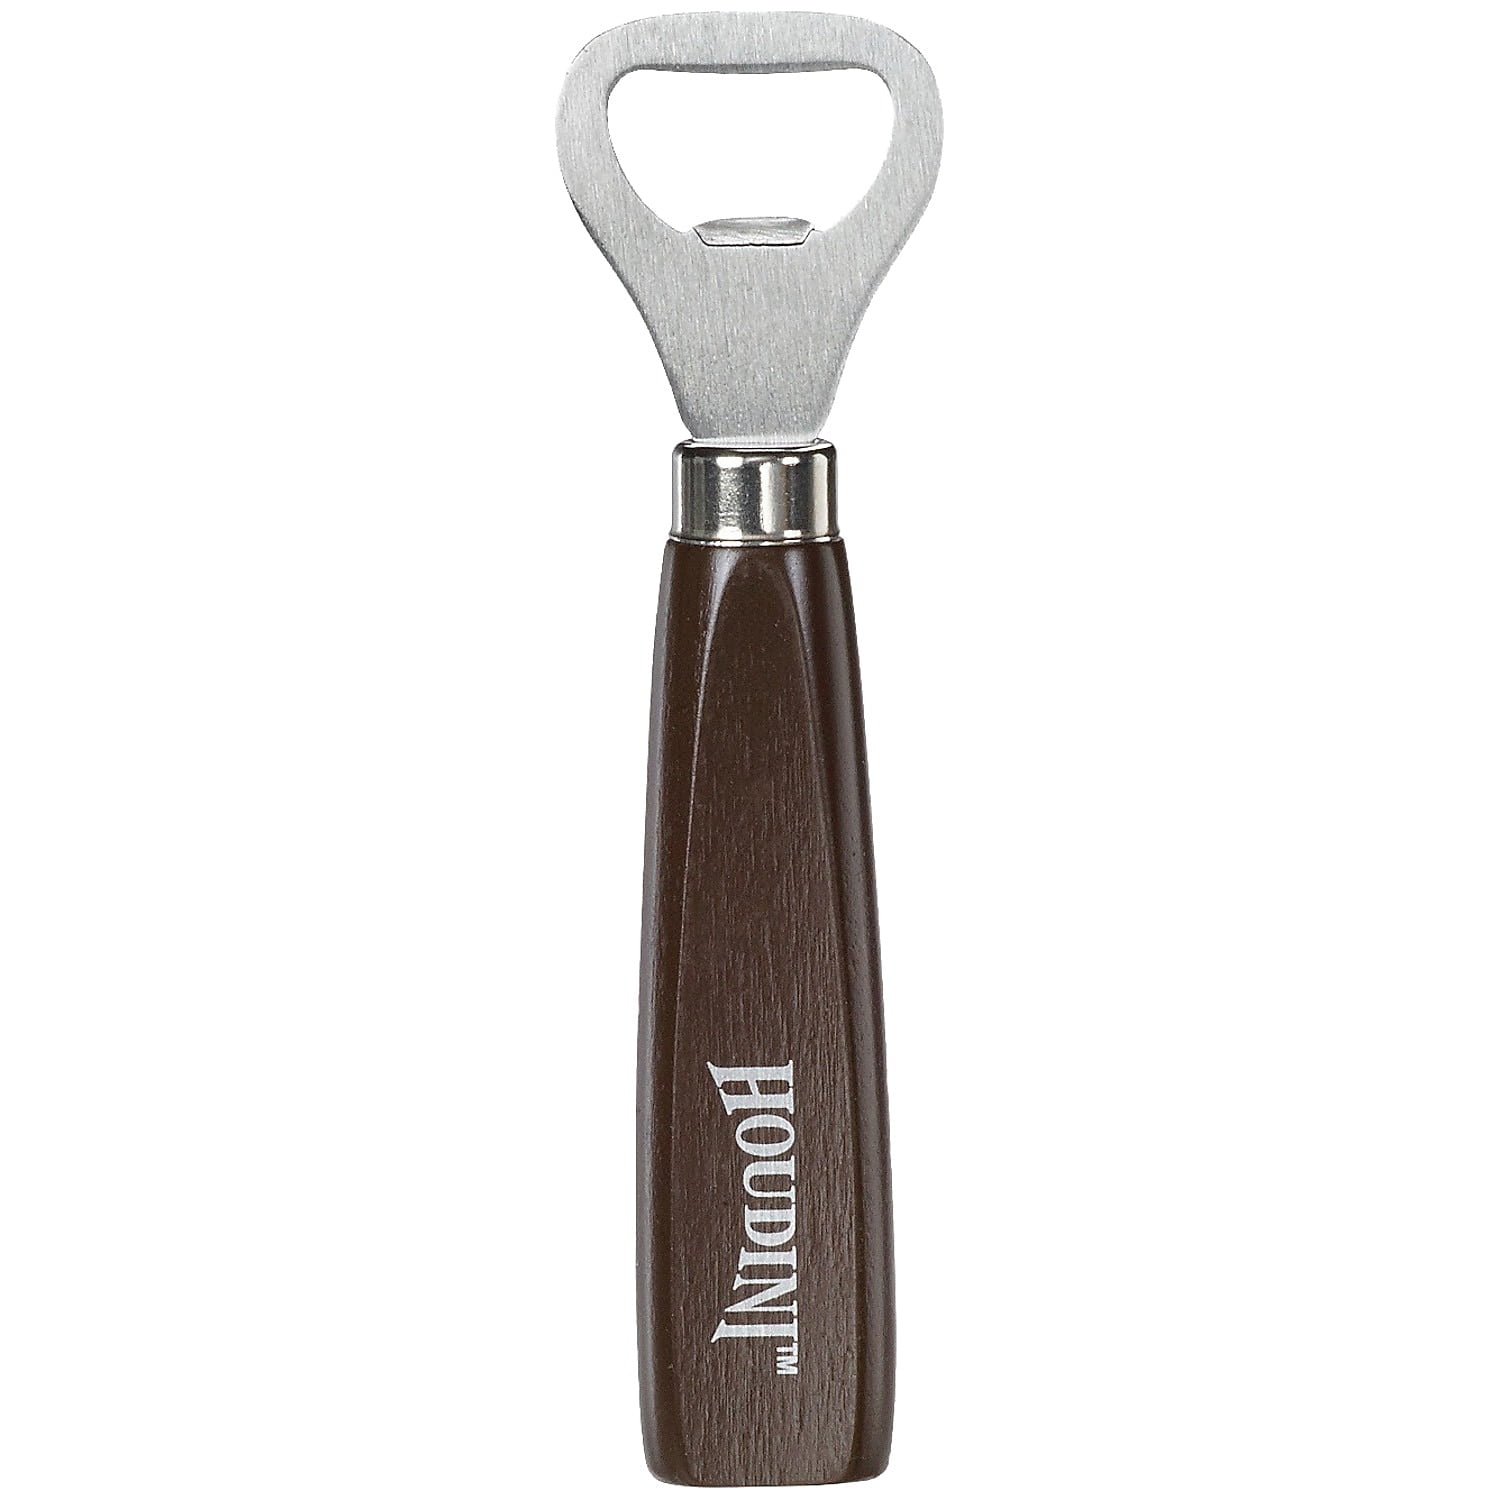 Winco CO-303 Can Tapper/Bottle Opener with Wooden Handle